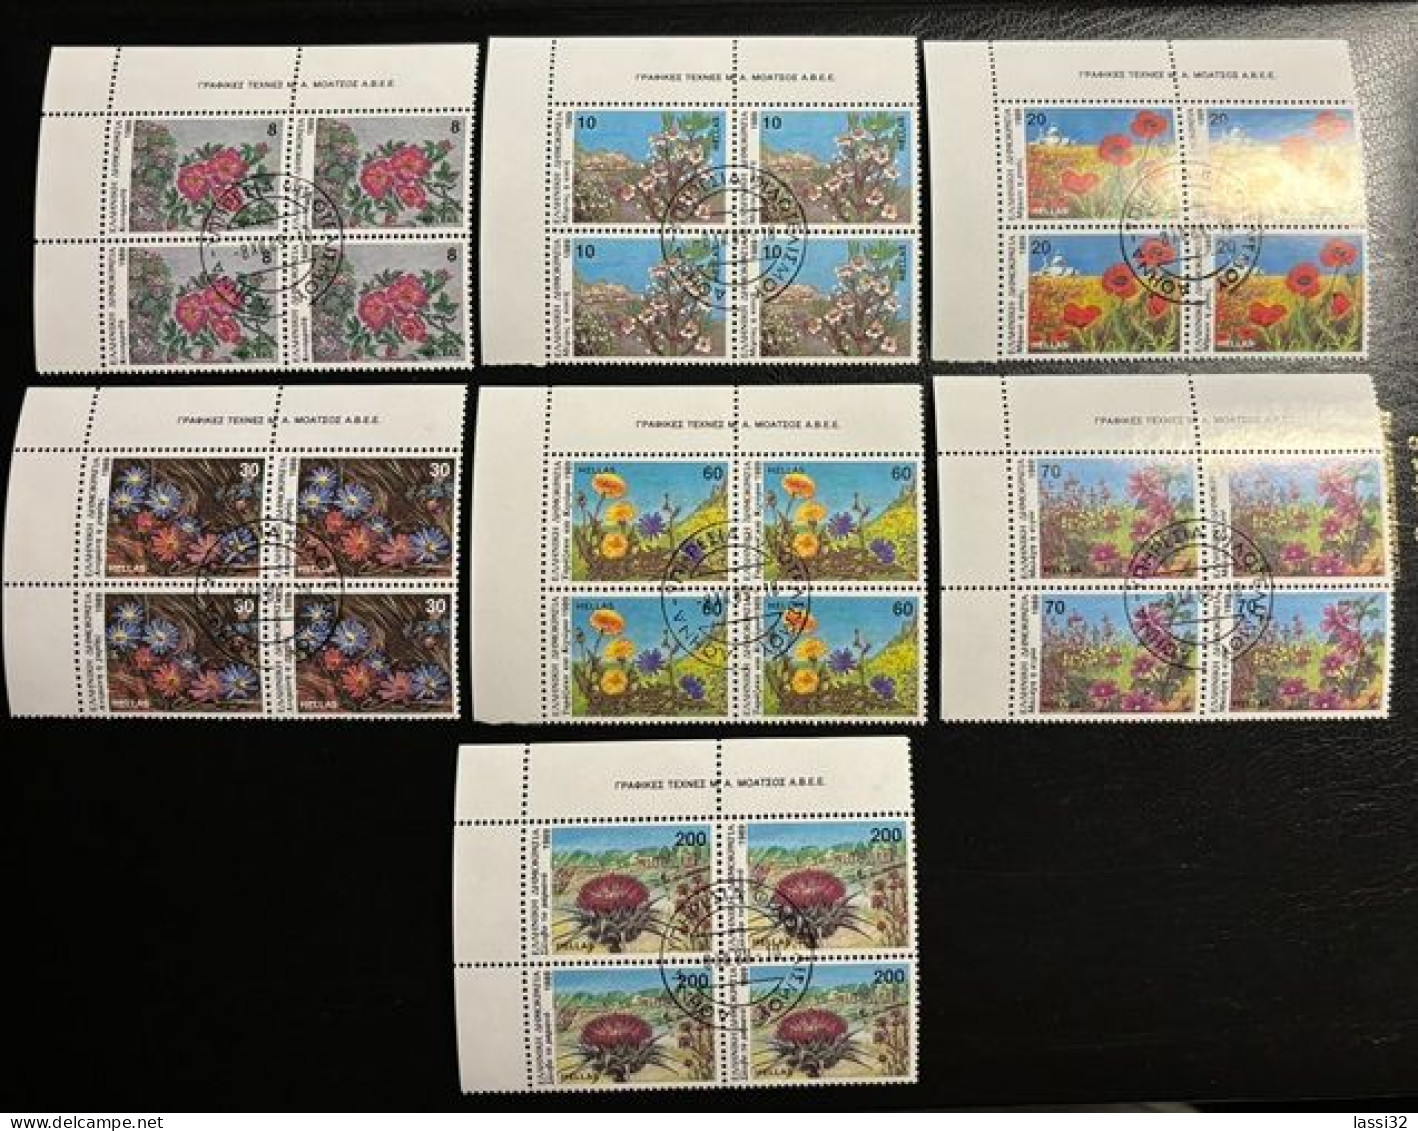 GREECE,1989, WILD FLOWERS, USED - Used Stamps